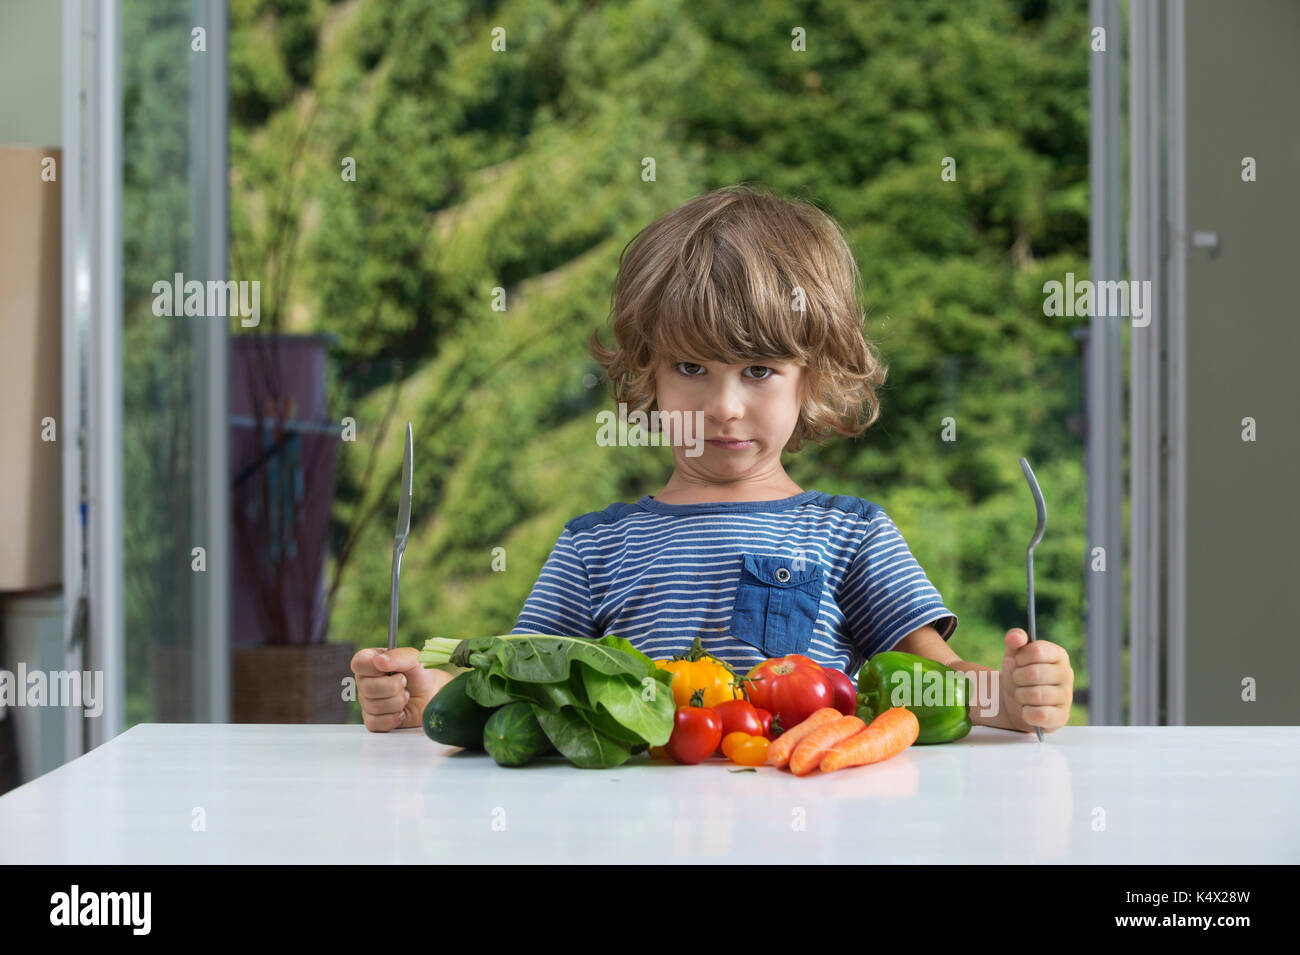 Cute little boy sitting at the table, frowning over vegetable meal, bad eating habits, nutrition and healthy eating concept Stock Photo